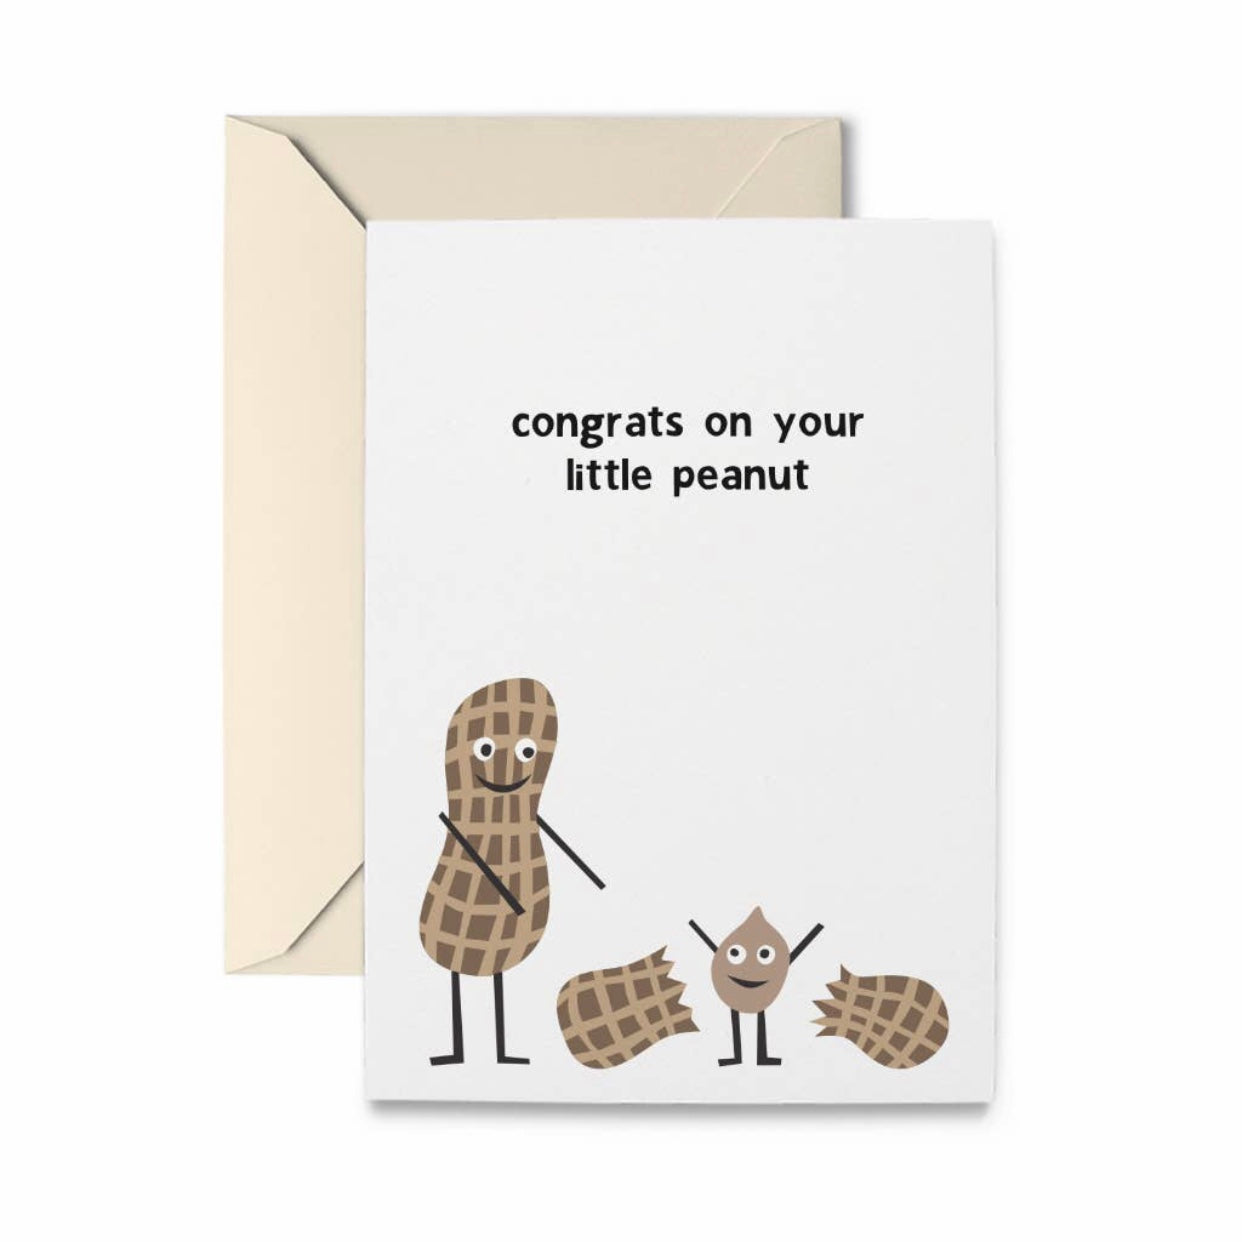 congrats on your little peanut greeting card